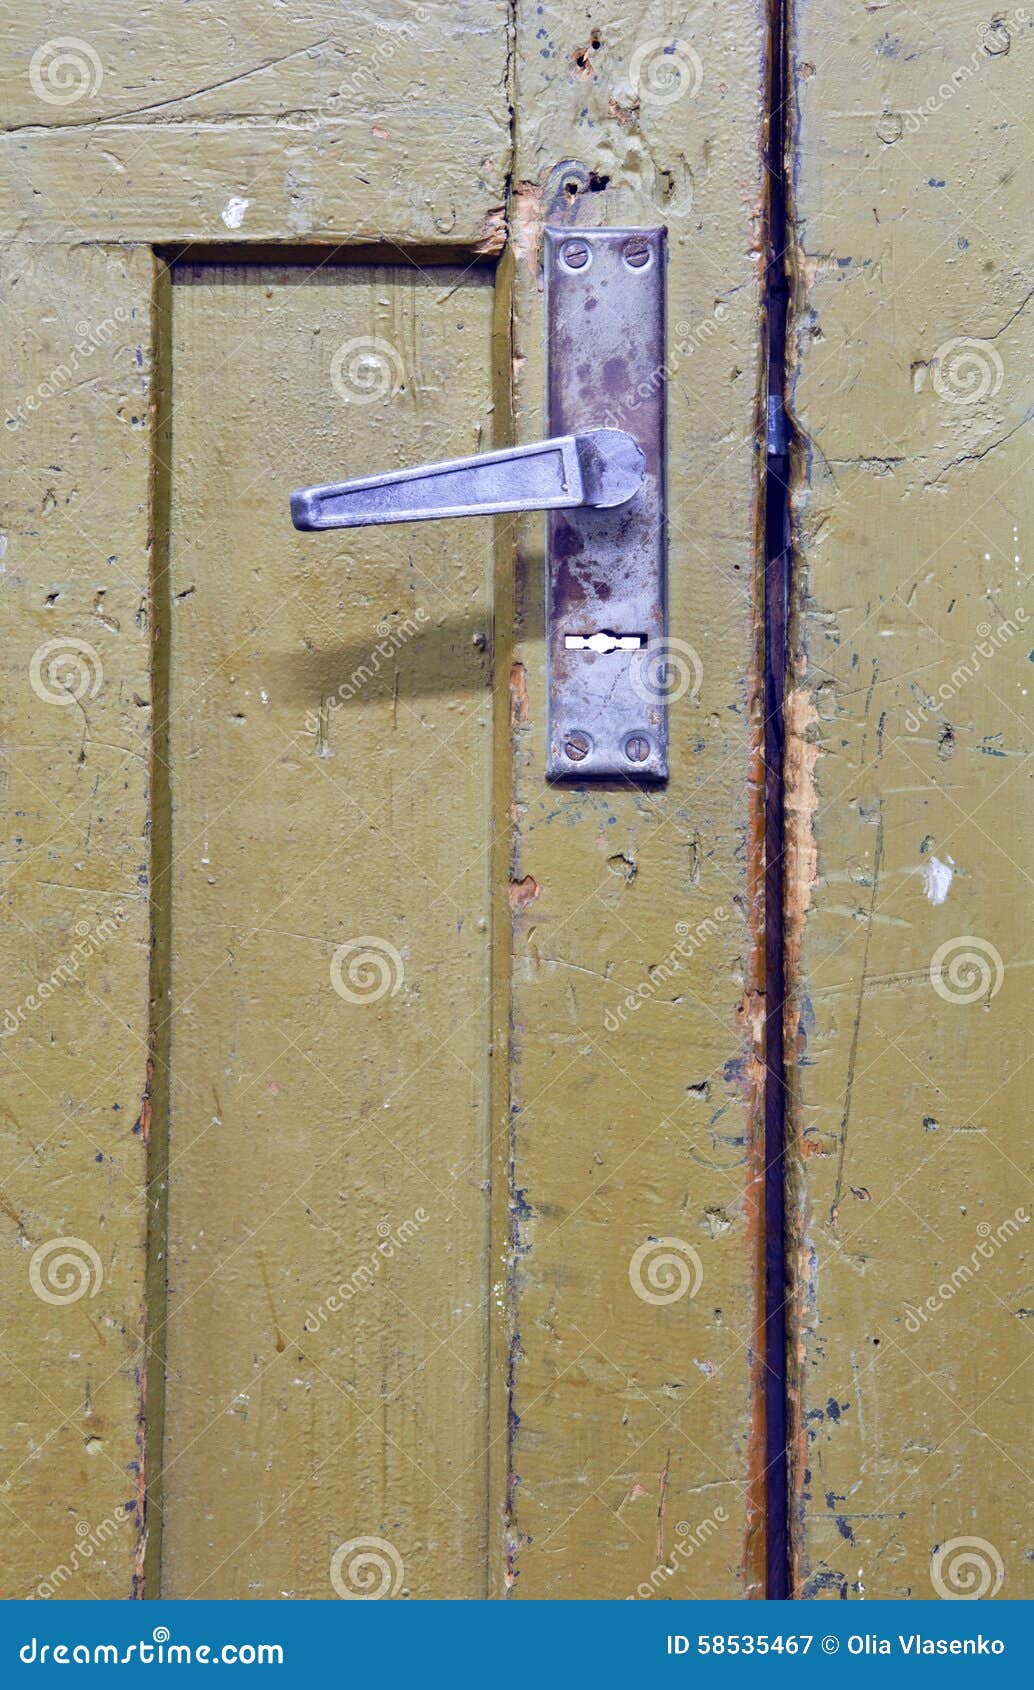 Old dirty door stock image. Image of ancient, effect - 58535467